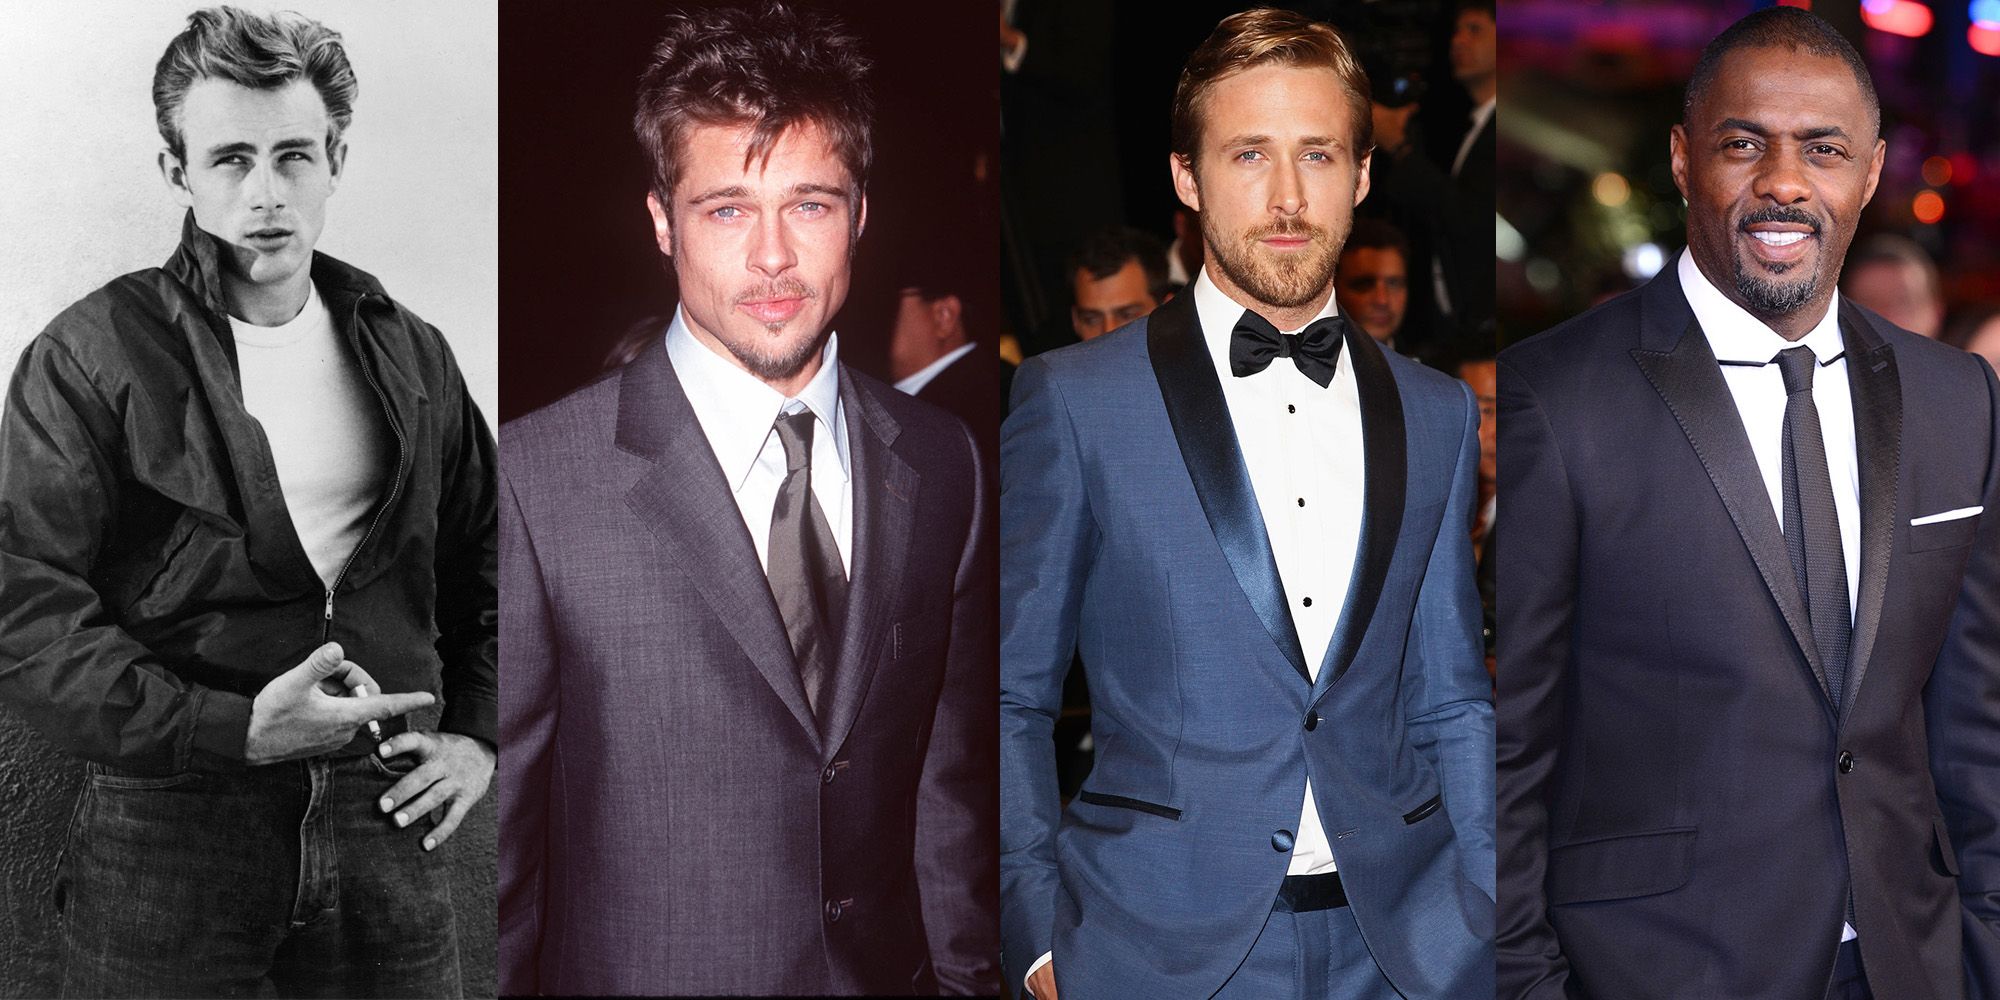 Most good looking current male celebs